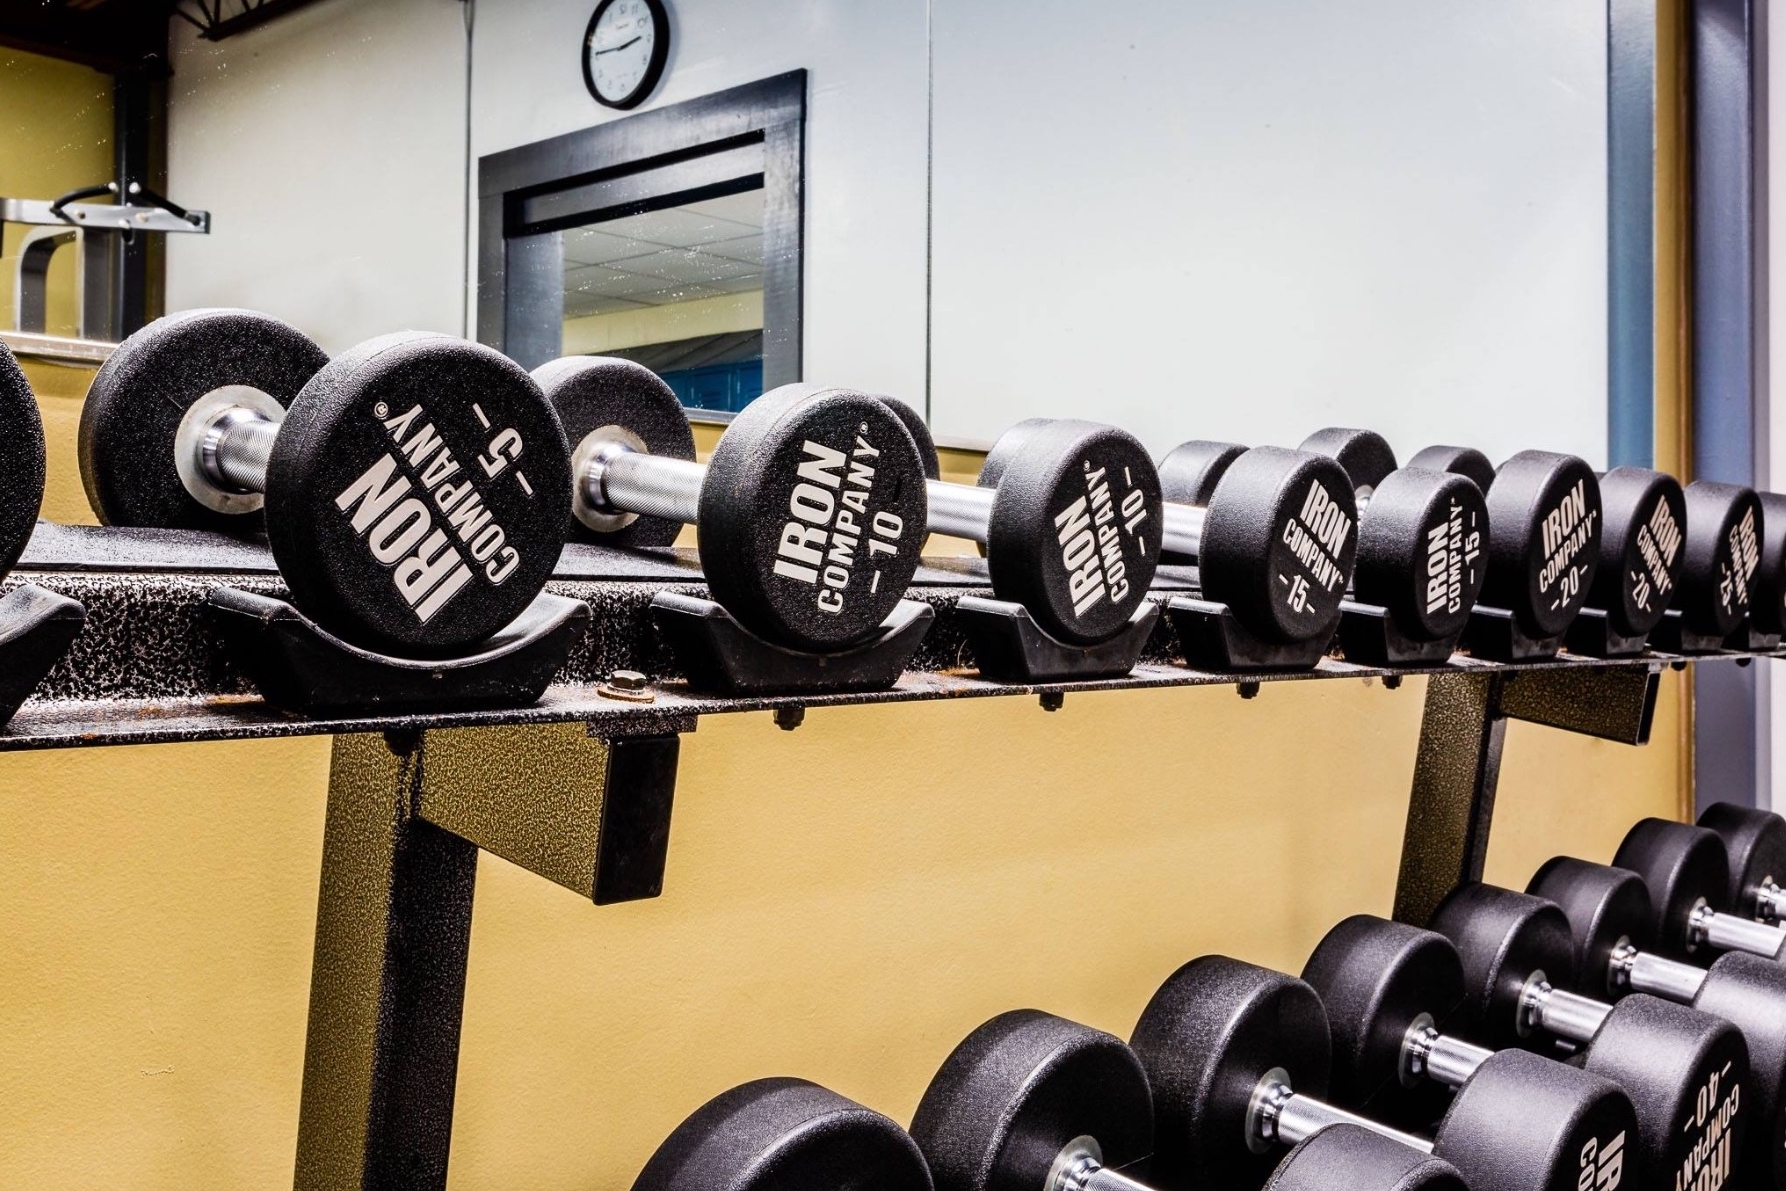 Solid Steel Urethane Dumbbells for once-a-week strength training